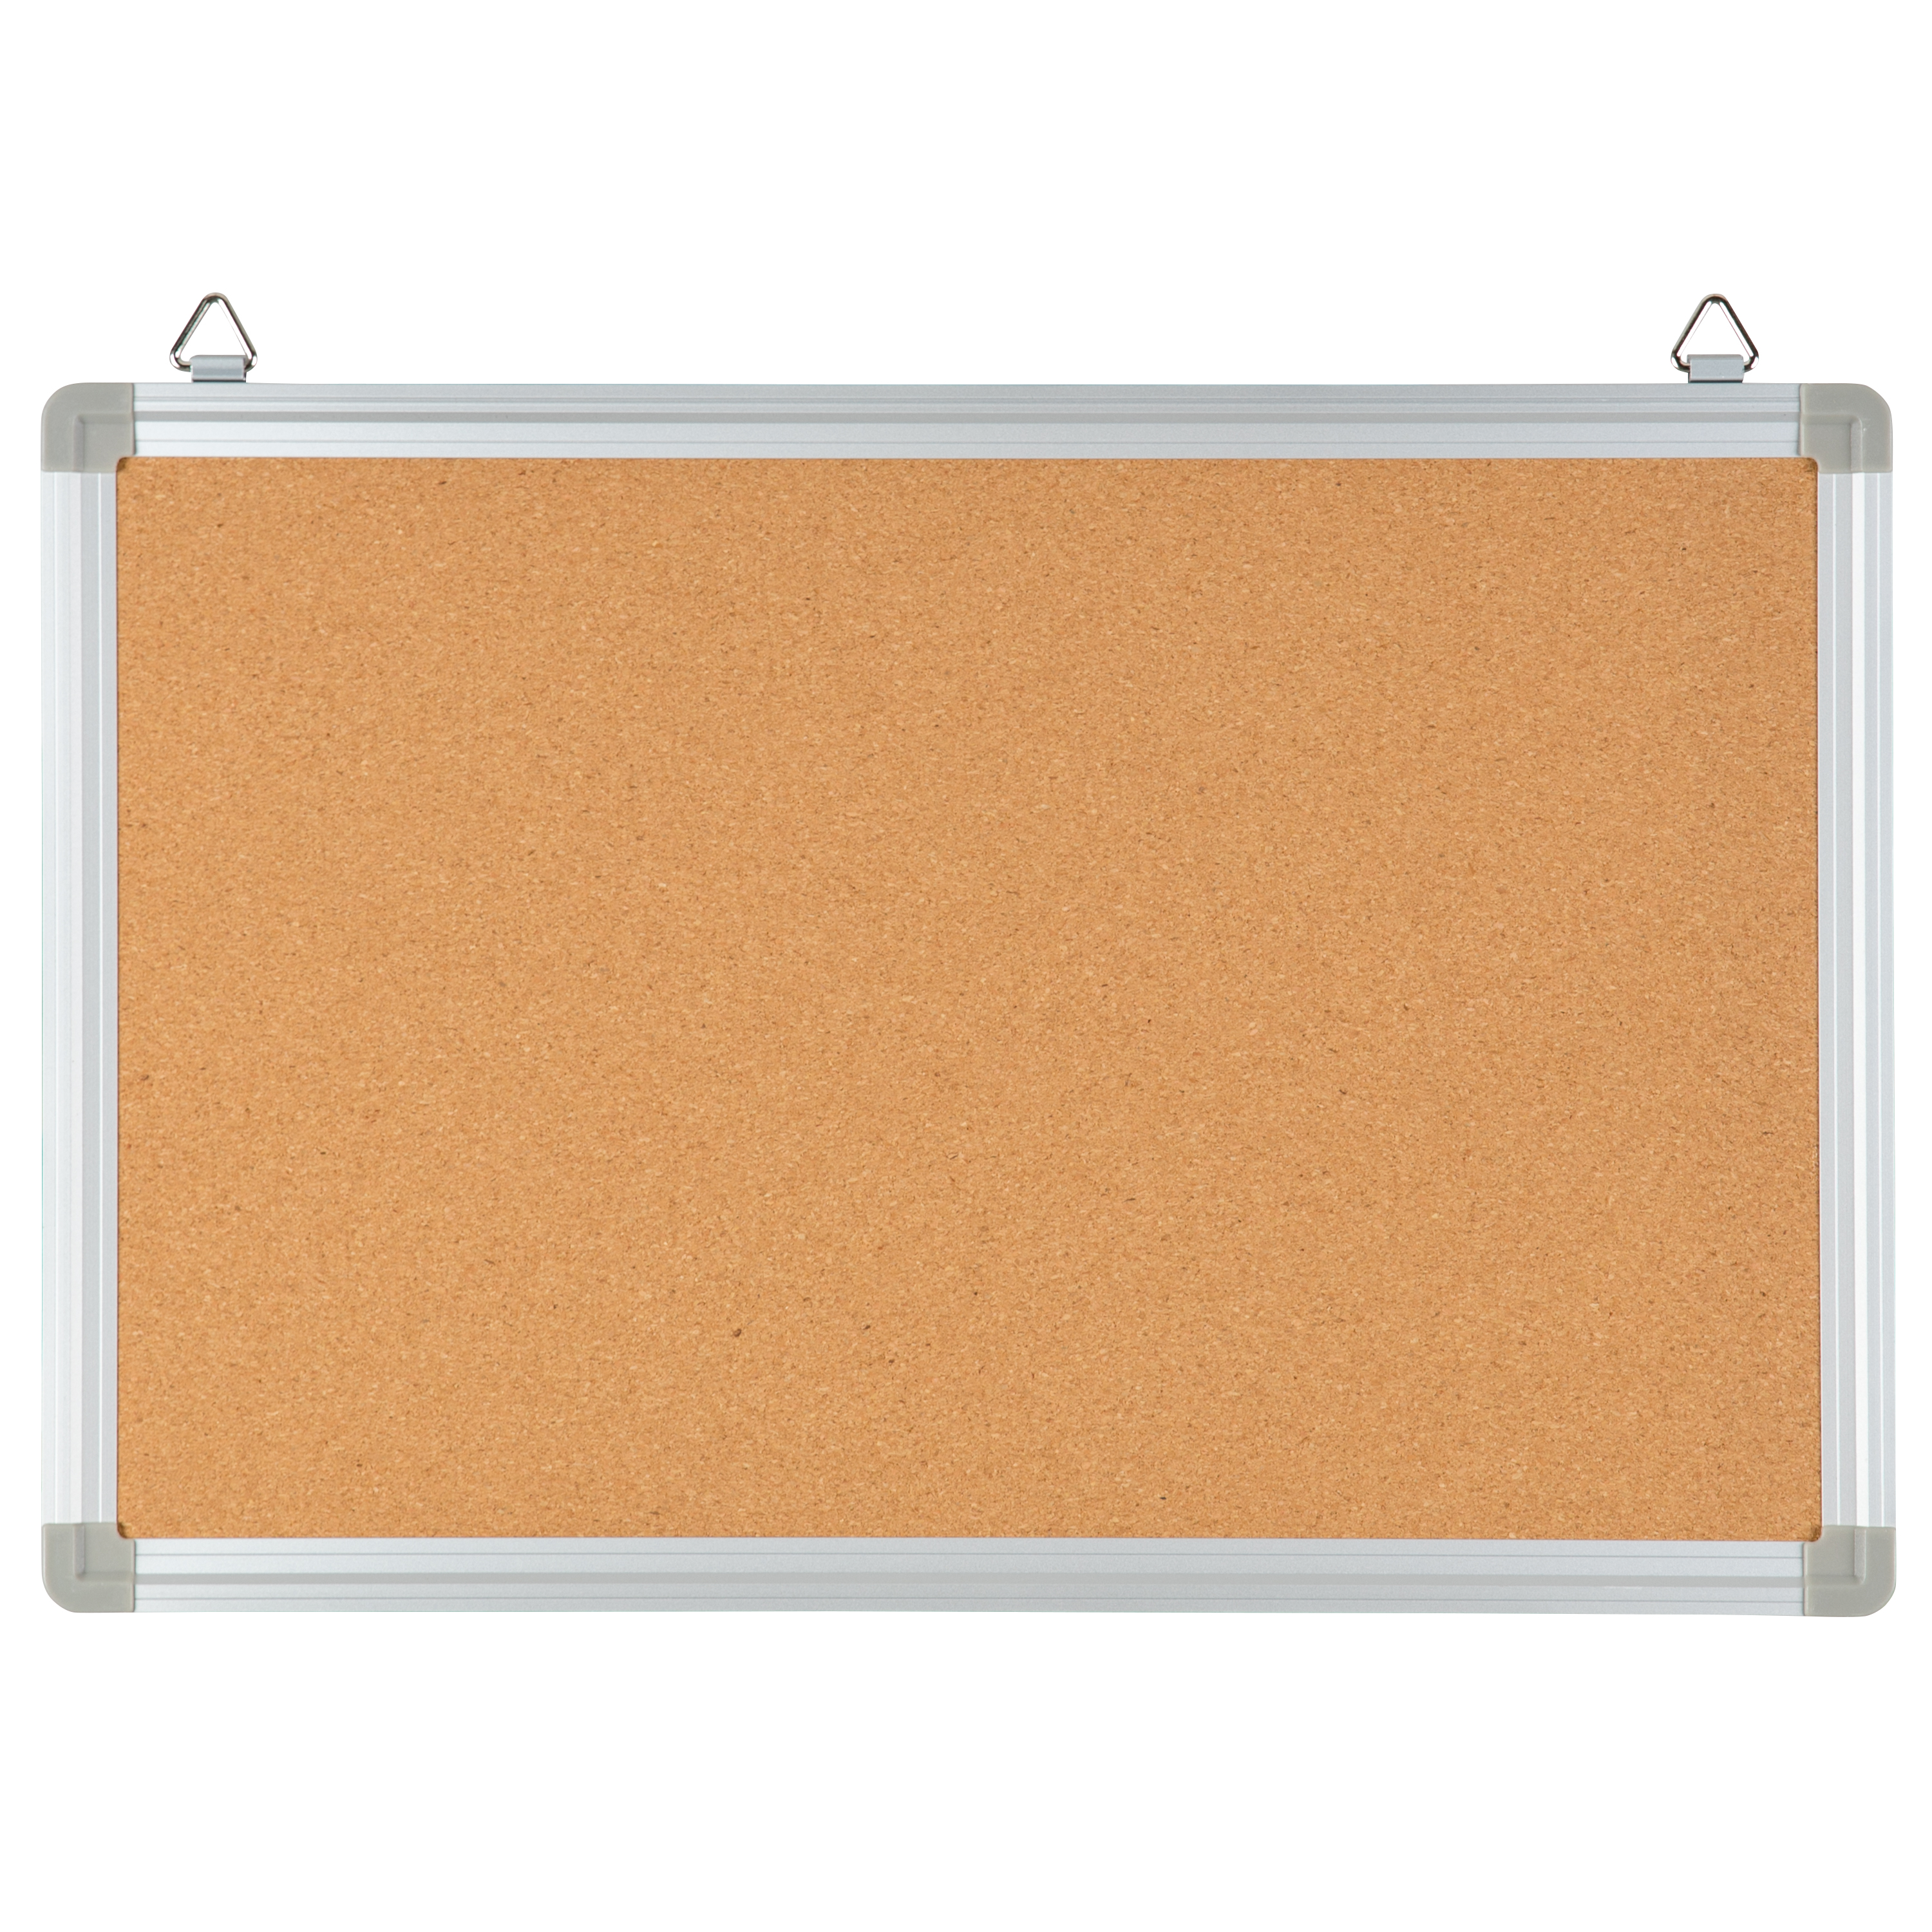 Flash Furniture YU-YCN-001-GG 17.75"W x 11.75"H Personal Sized Natural Cork Board with Aluminum Frame